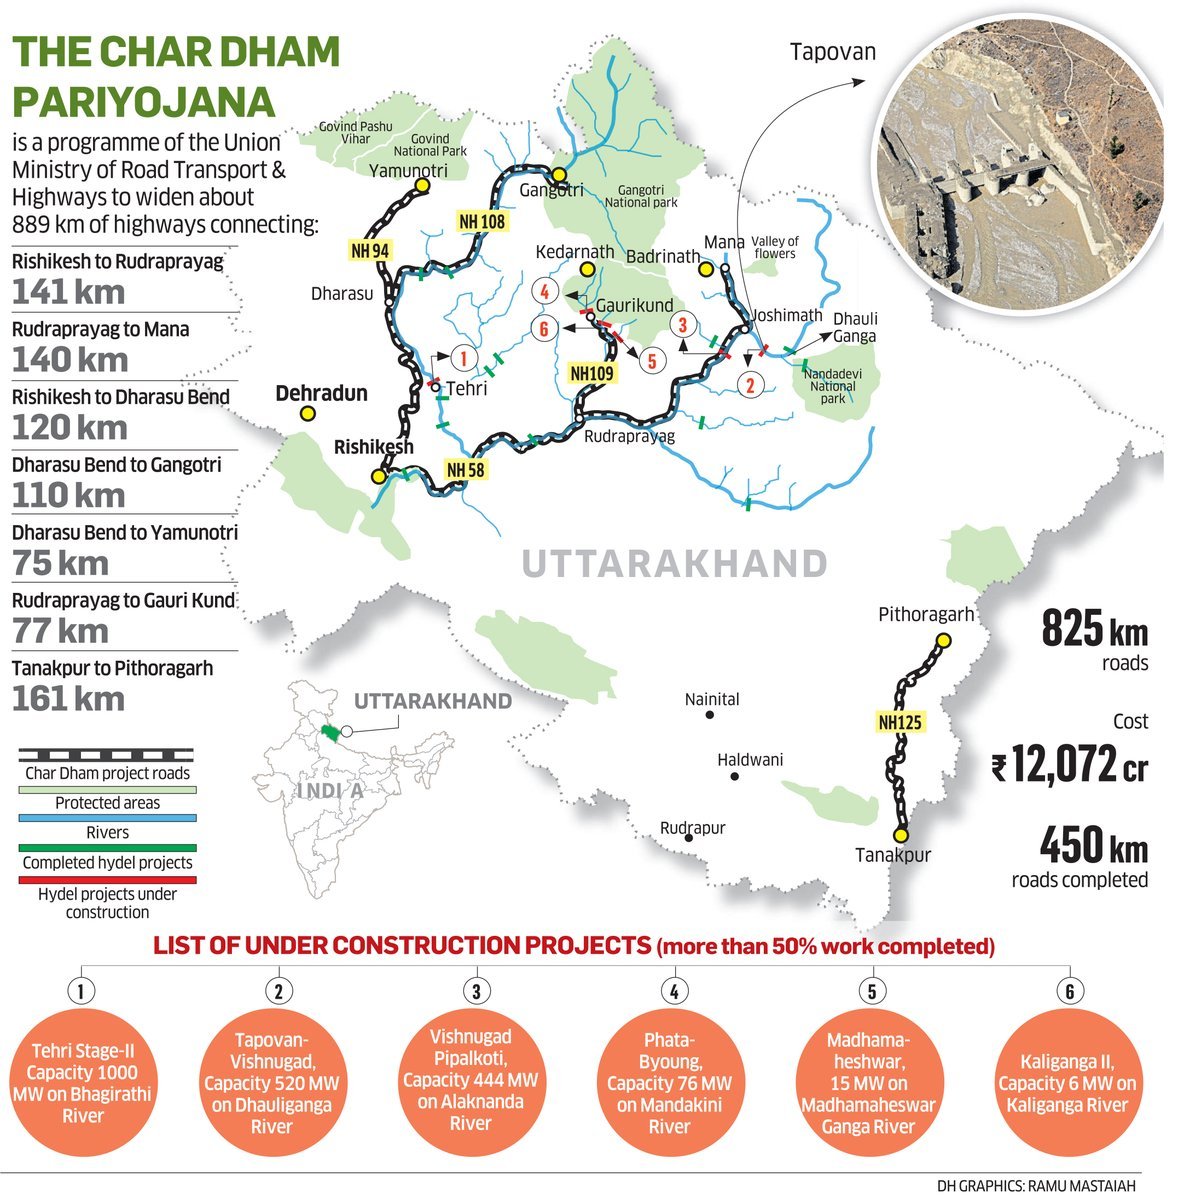 Char Dham All-Weather Road Project